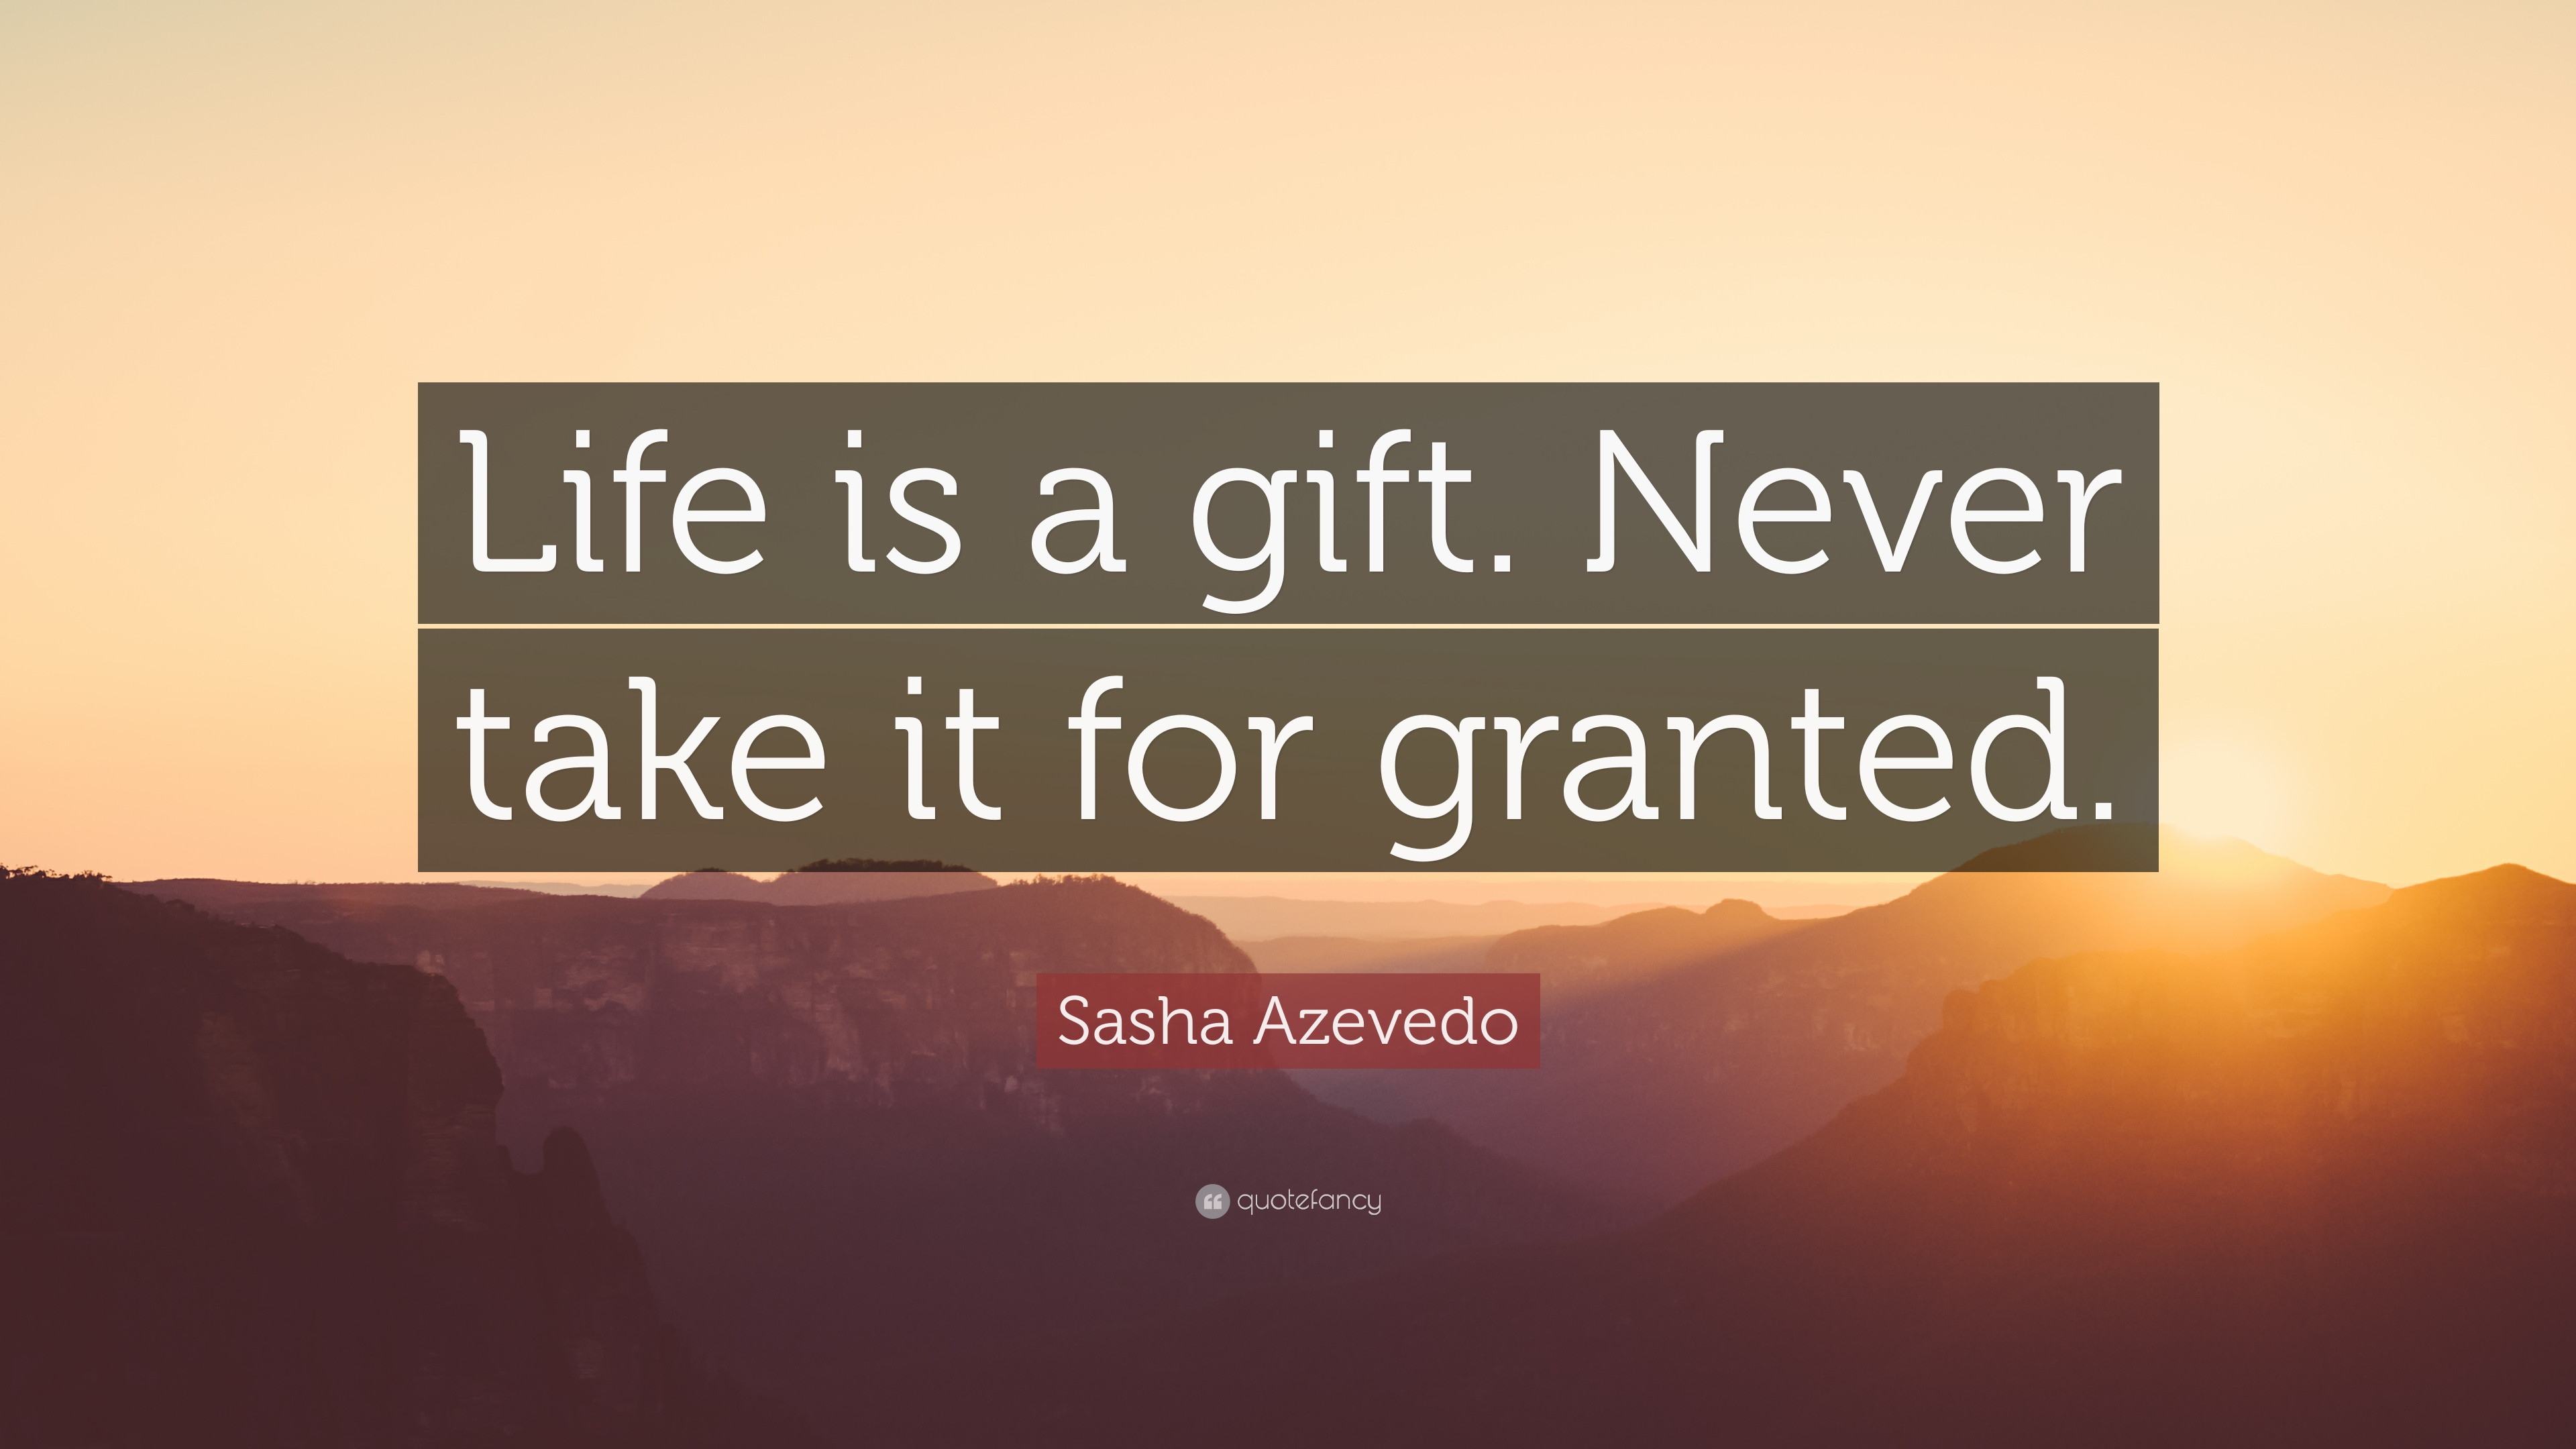 Life Is A Gift Quotes
 Sasha Azevedo Quote “Life is a t Never take it for